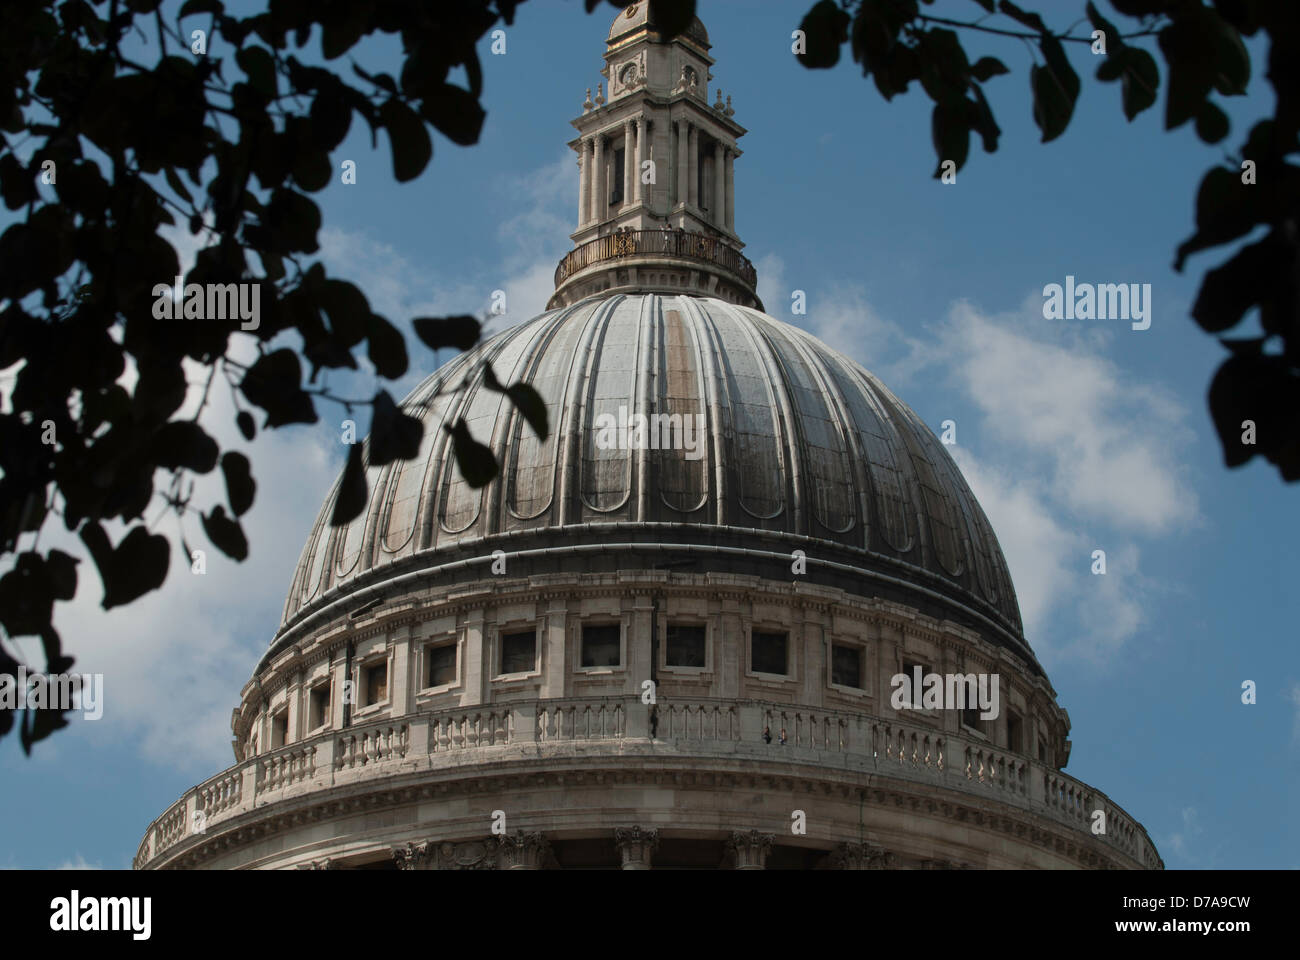 View of the top of St.Paul's Cathedral framed by trees, London, England. Stock Photo